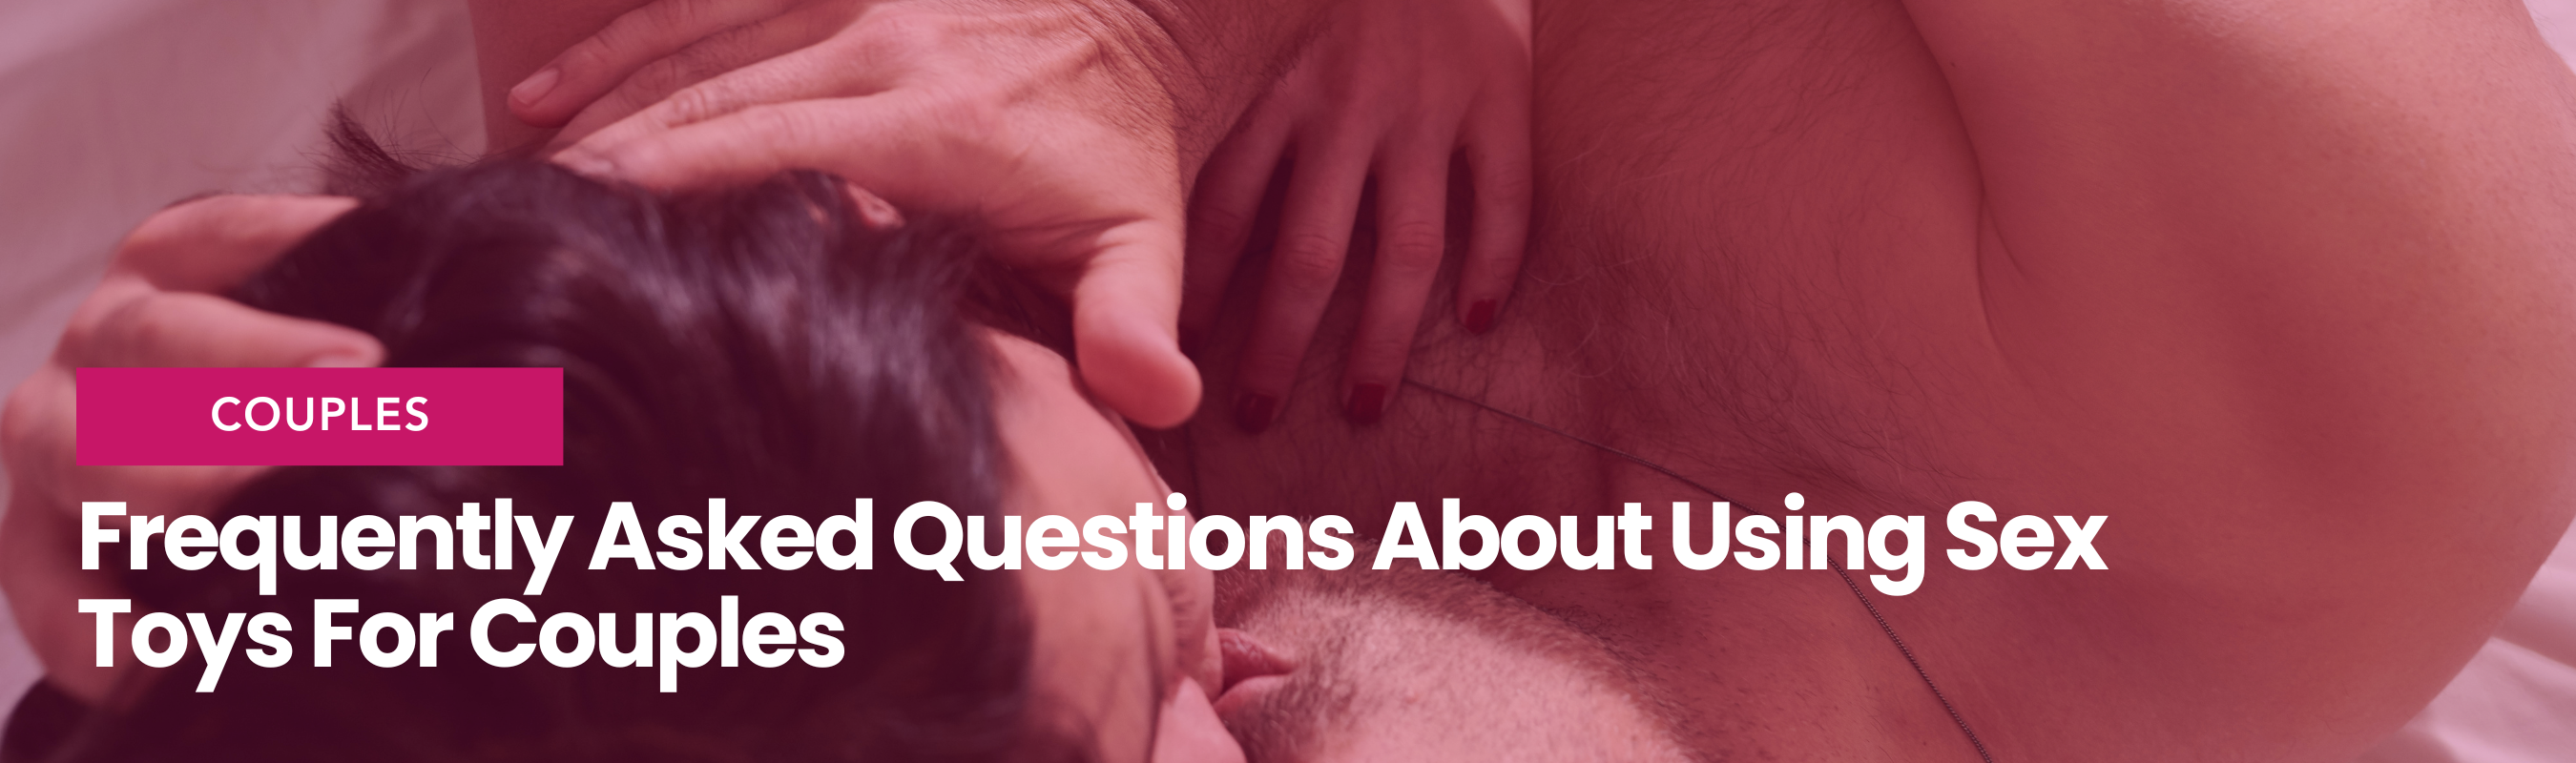 Frequently Asked Questions About Using Sex Toys For Couples